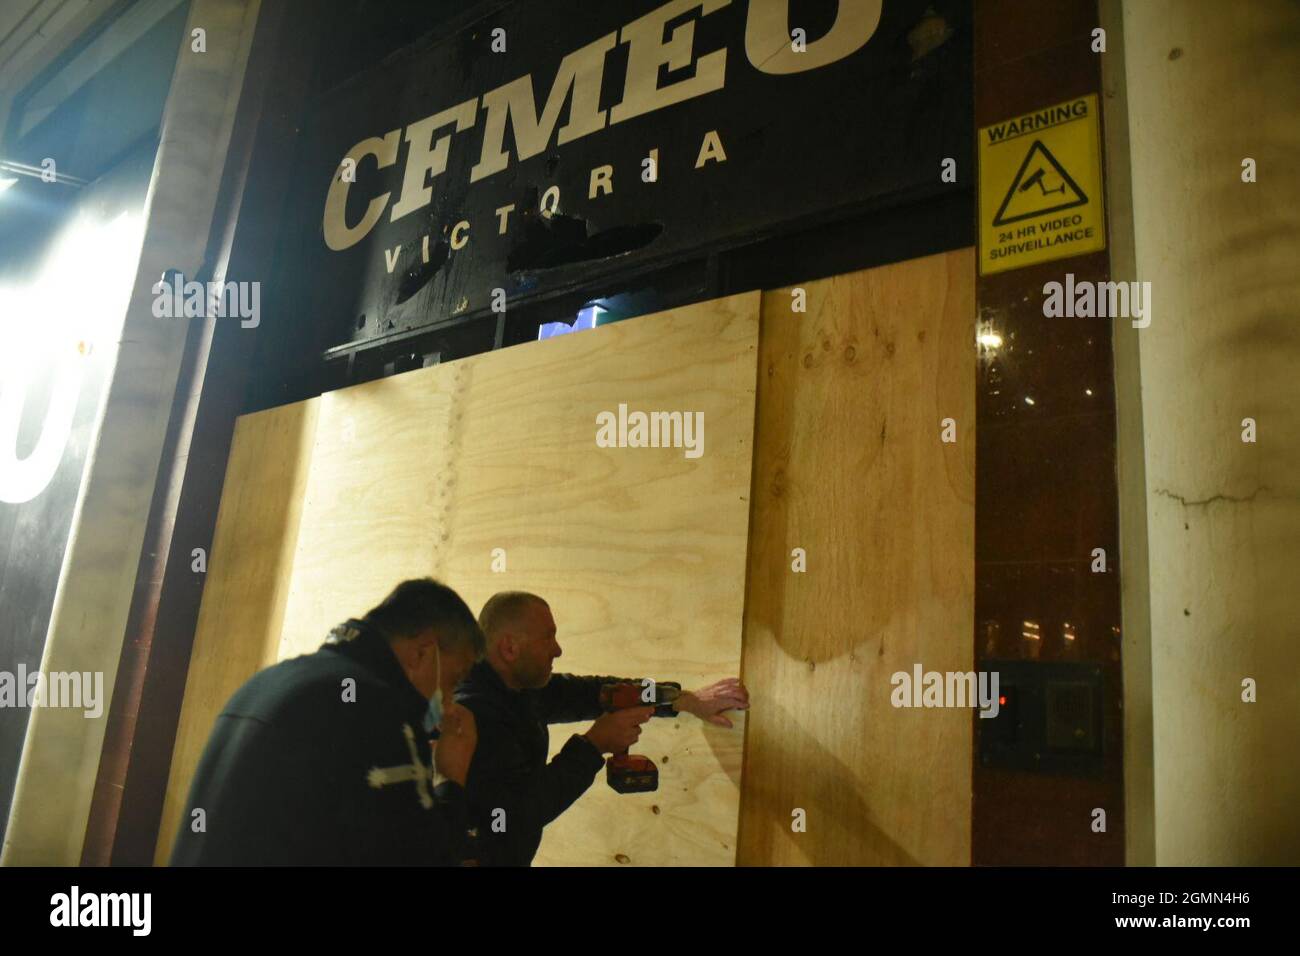 Melbourne, Australia. 20th September 2021. CFMEU members board up the union headquarters after extensive damage following a protest by trade workers over mandatory vaccinations. This comes after the annoucnent of another protest for the following day. Credit: Jay Kogler/Alamy Live News Stock Photo